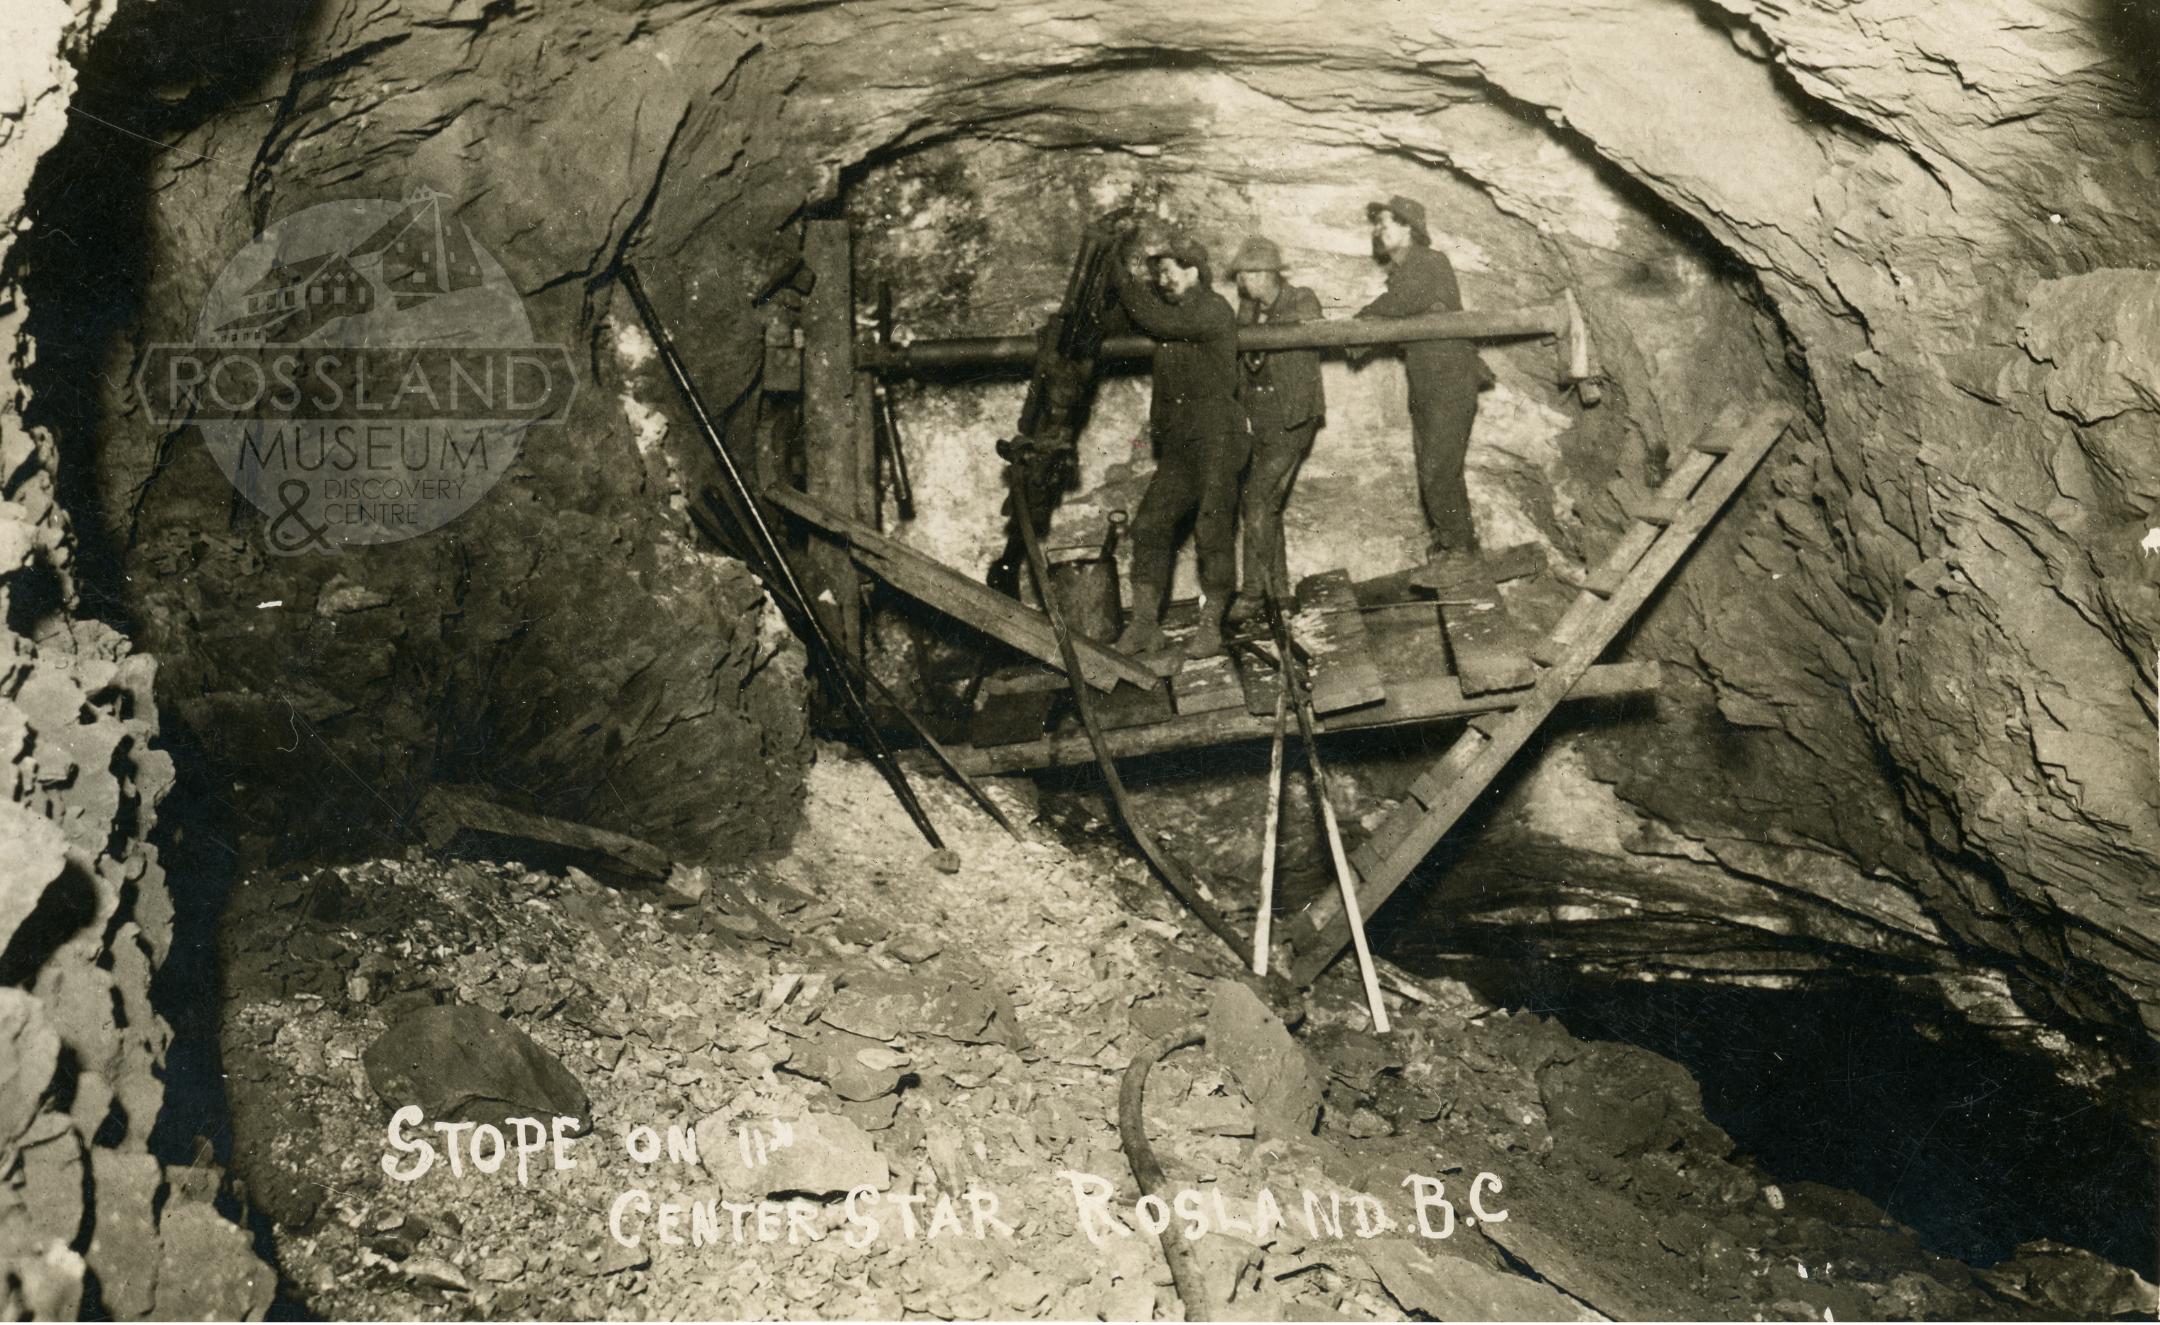 Photo 2304.0061: Drilling in a stope on the 11th level of Centre Star Mine, circa 1907